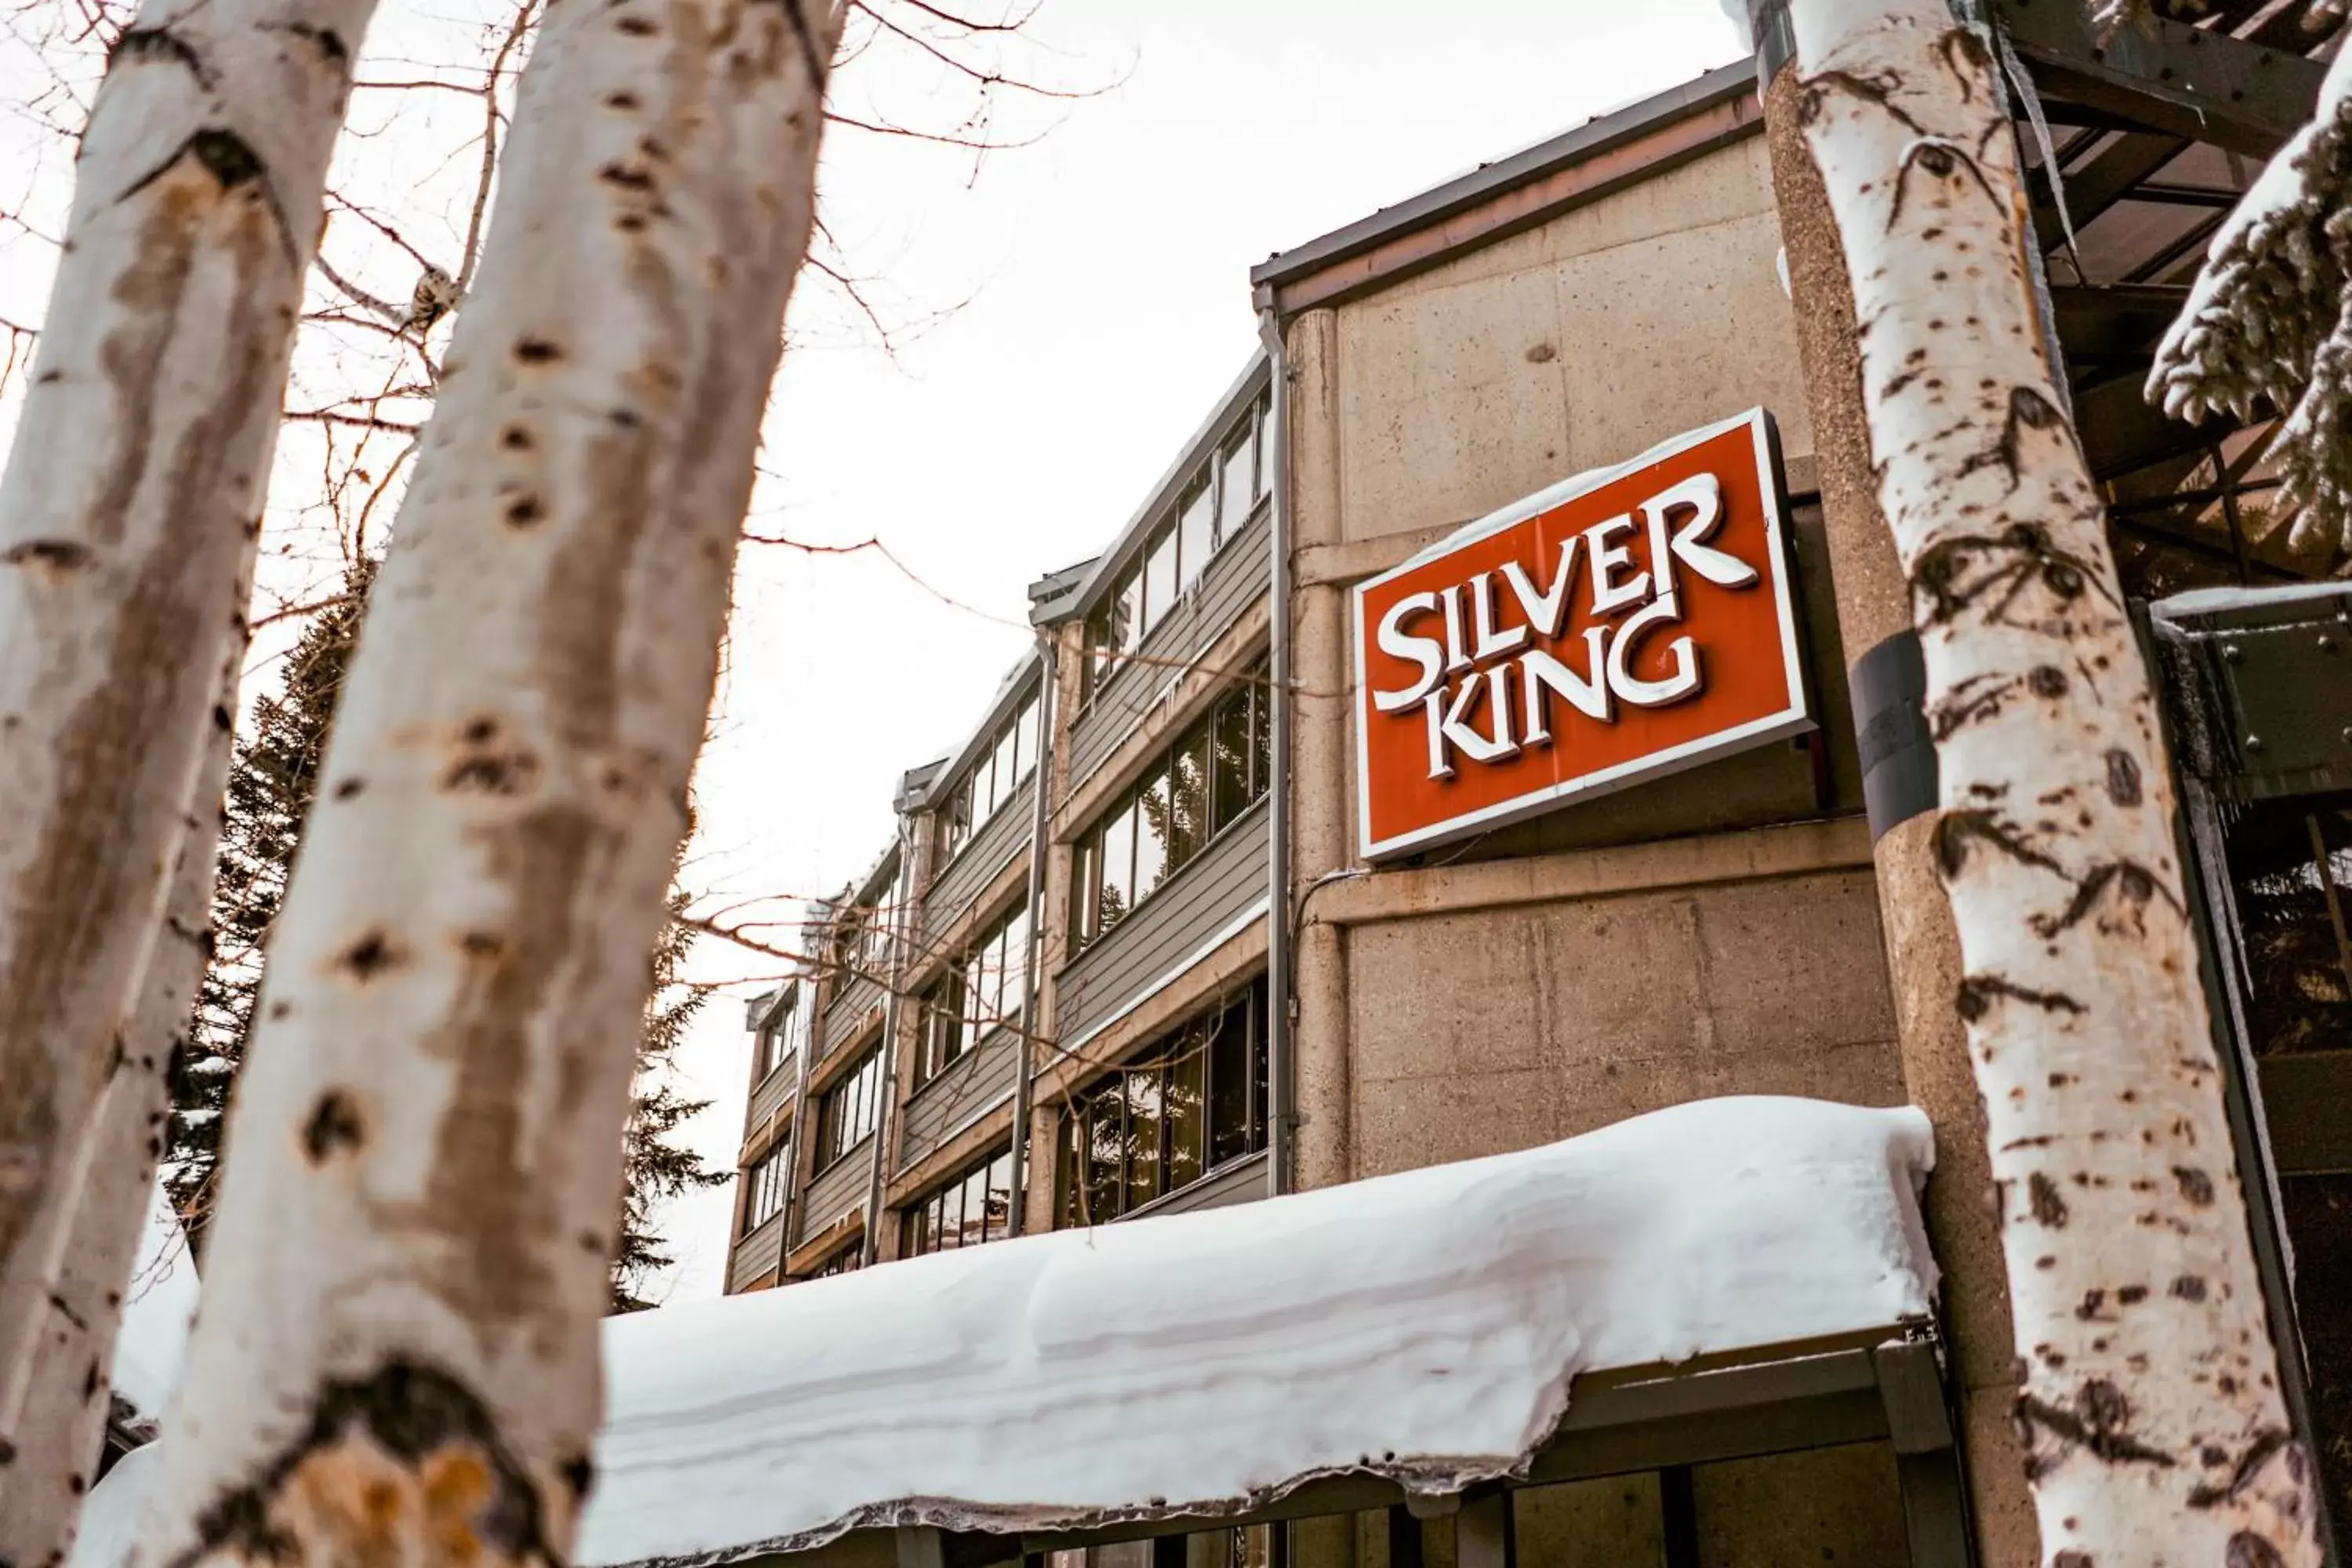 Property building, Winter in Silver King